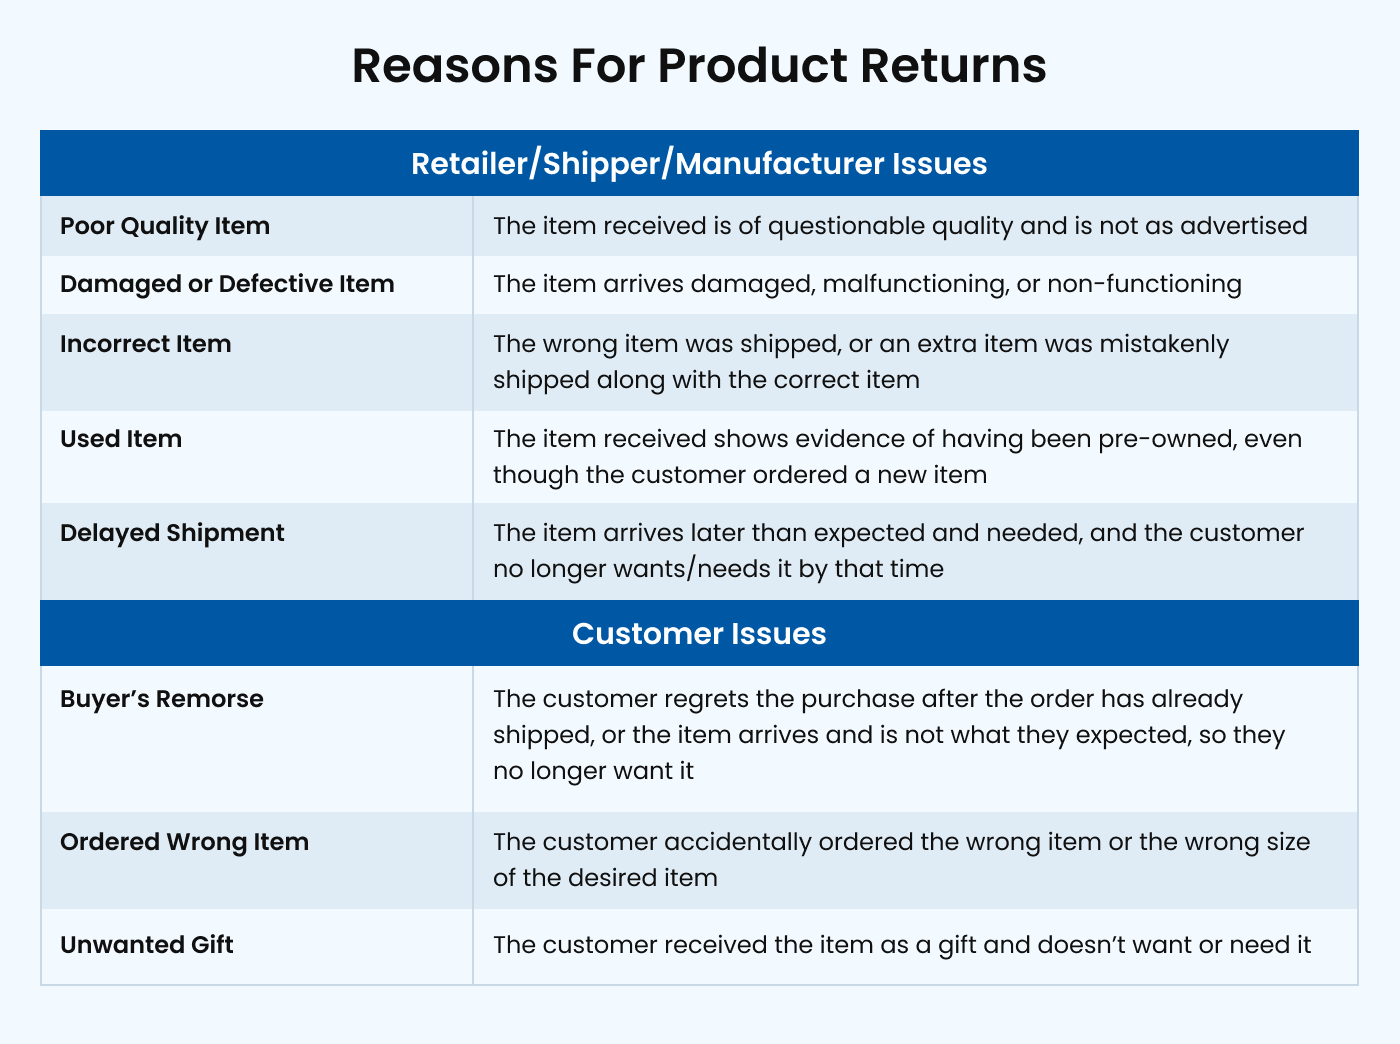 Reasons for product returns table